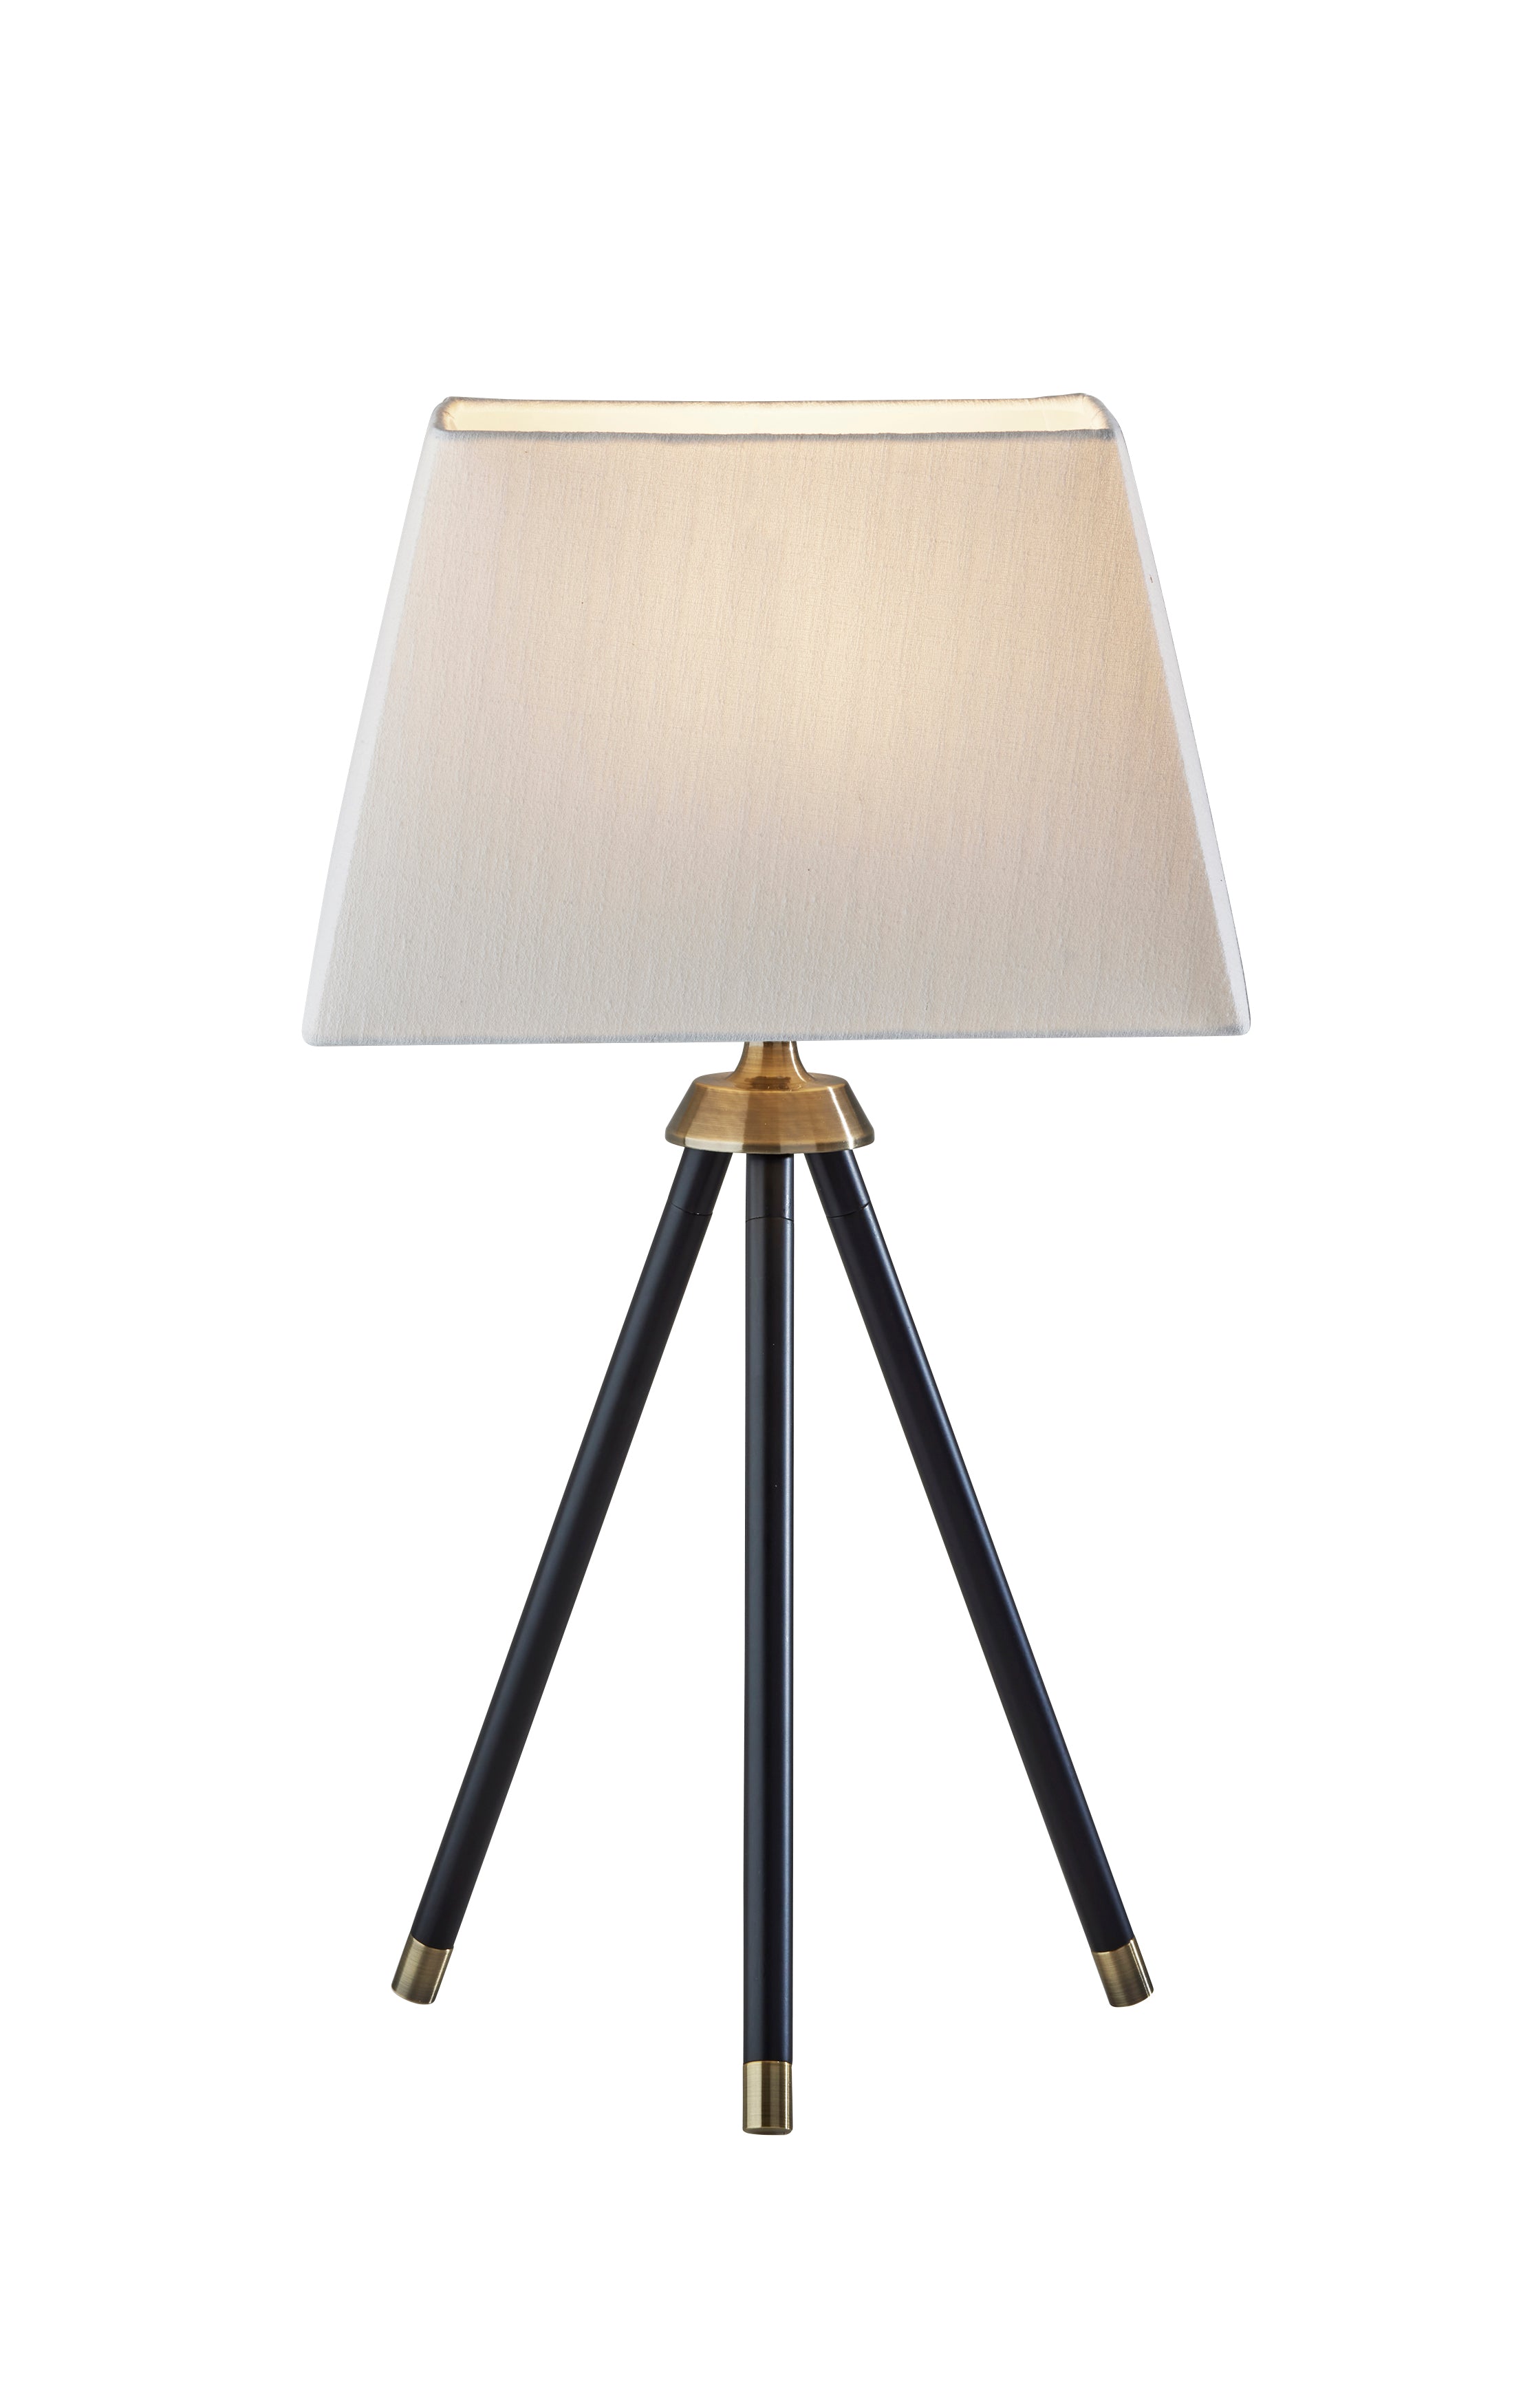 BEAUMONT Table lamp Black, Gold - 1598-01 | ADESSO